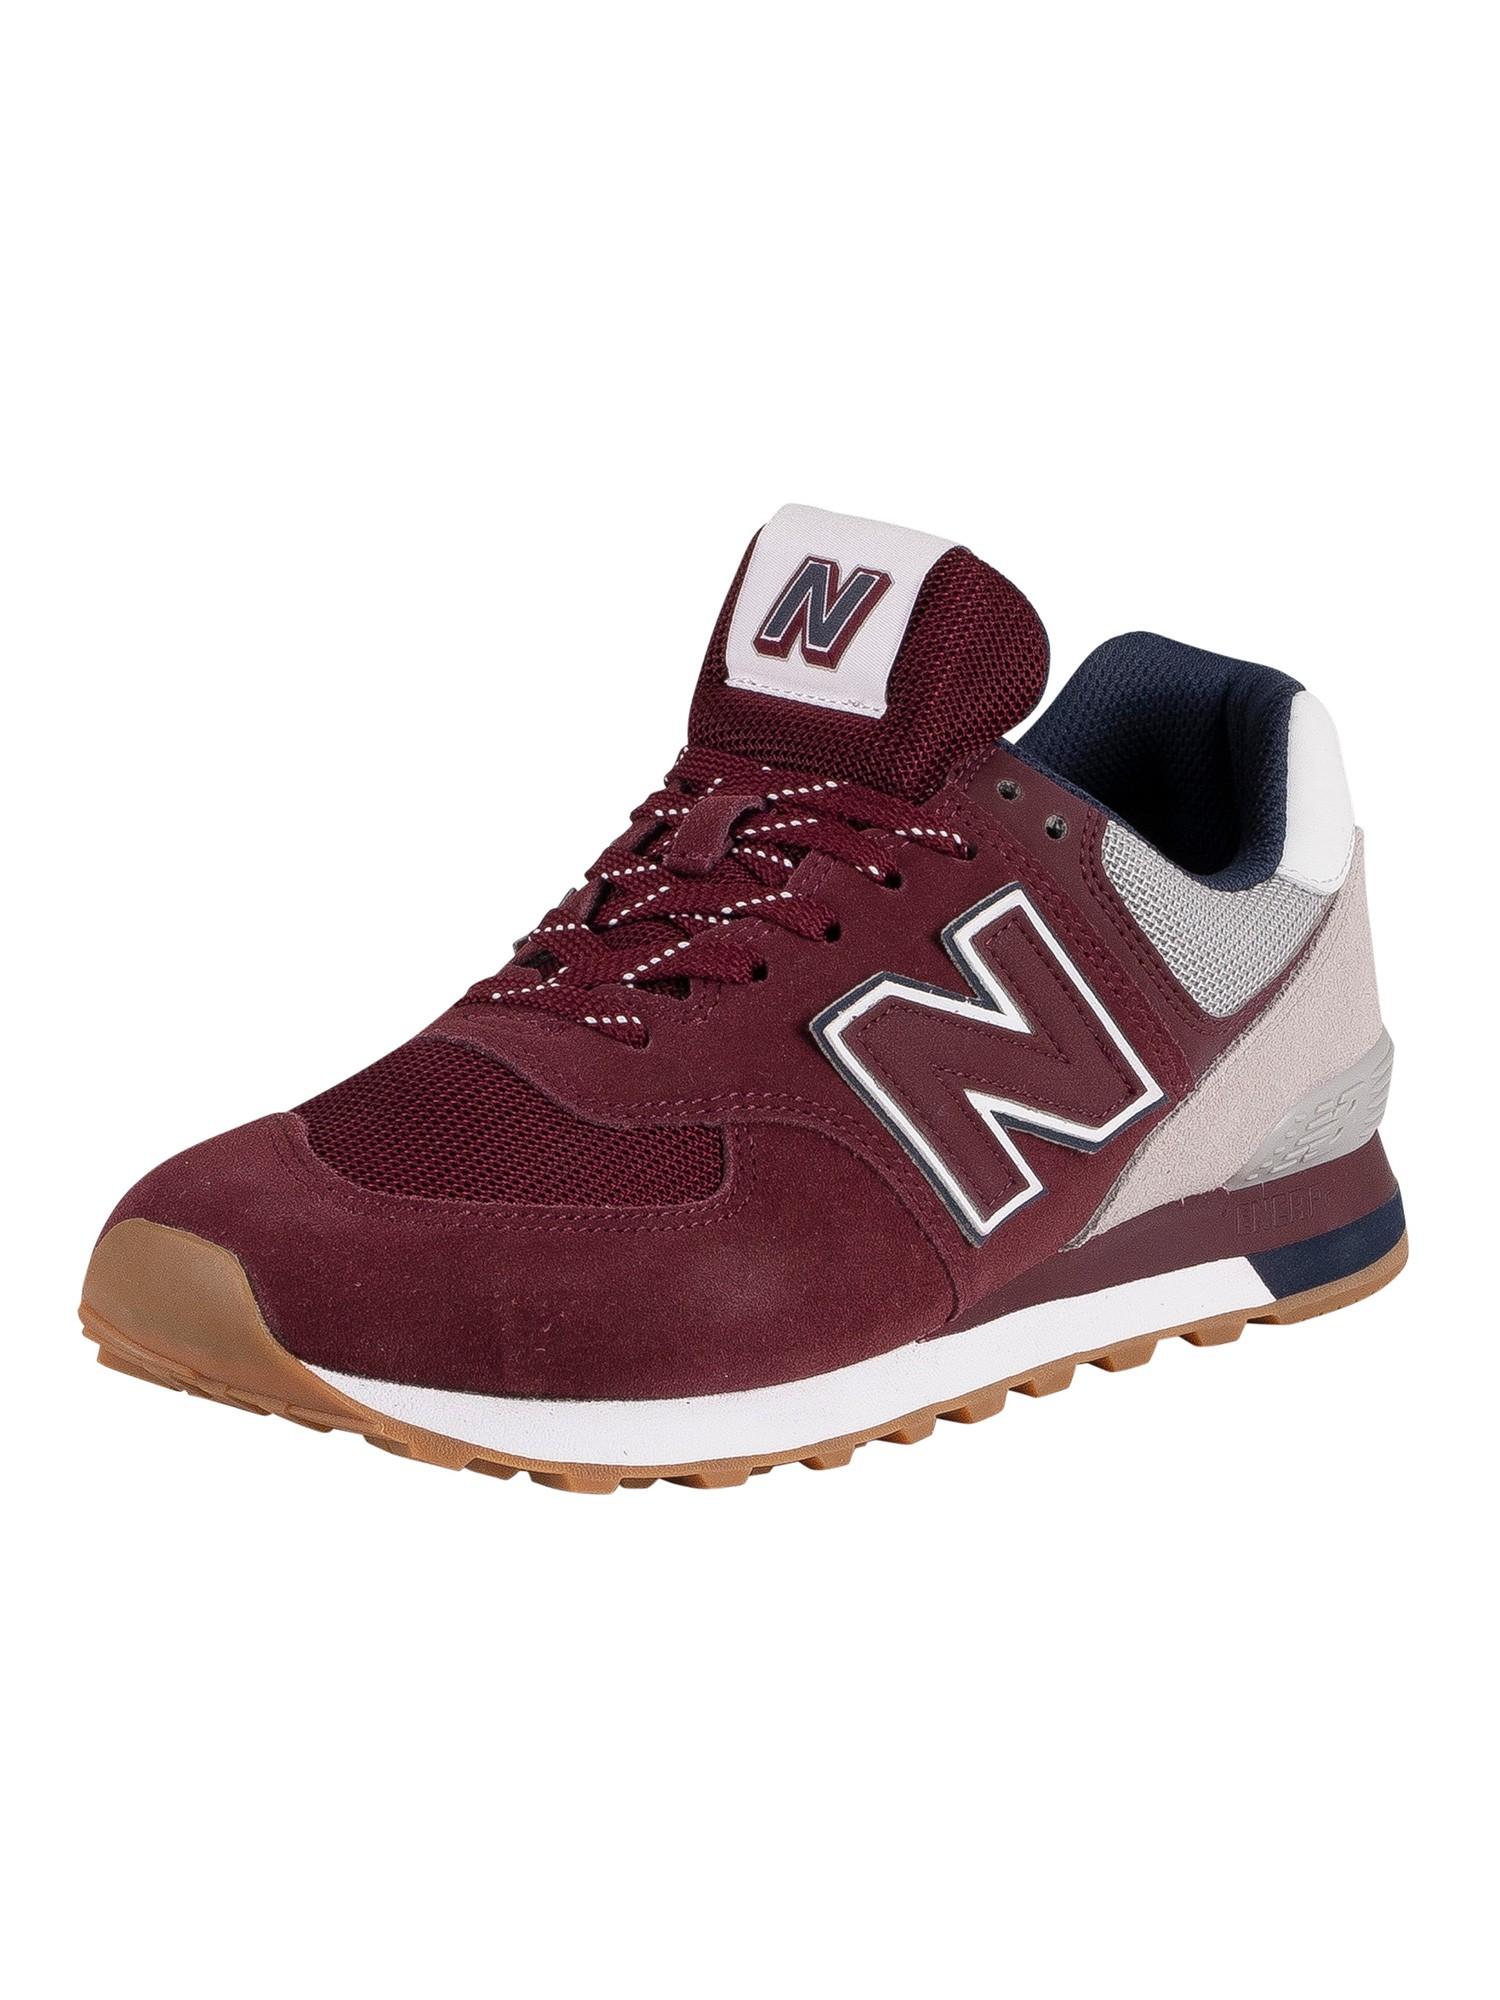 New Balance 574 Suede Trainers for Men 